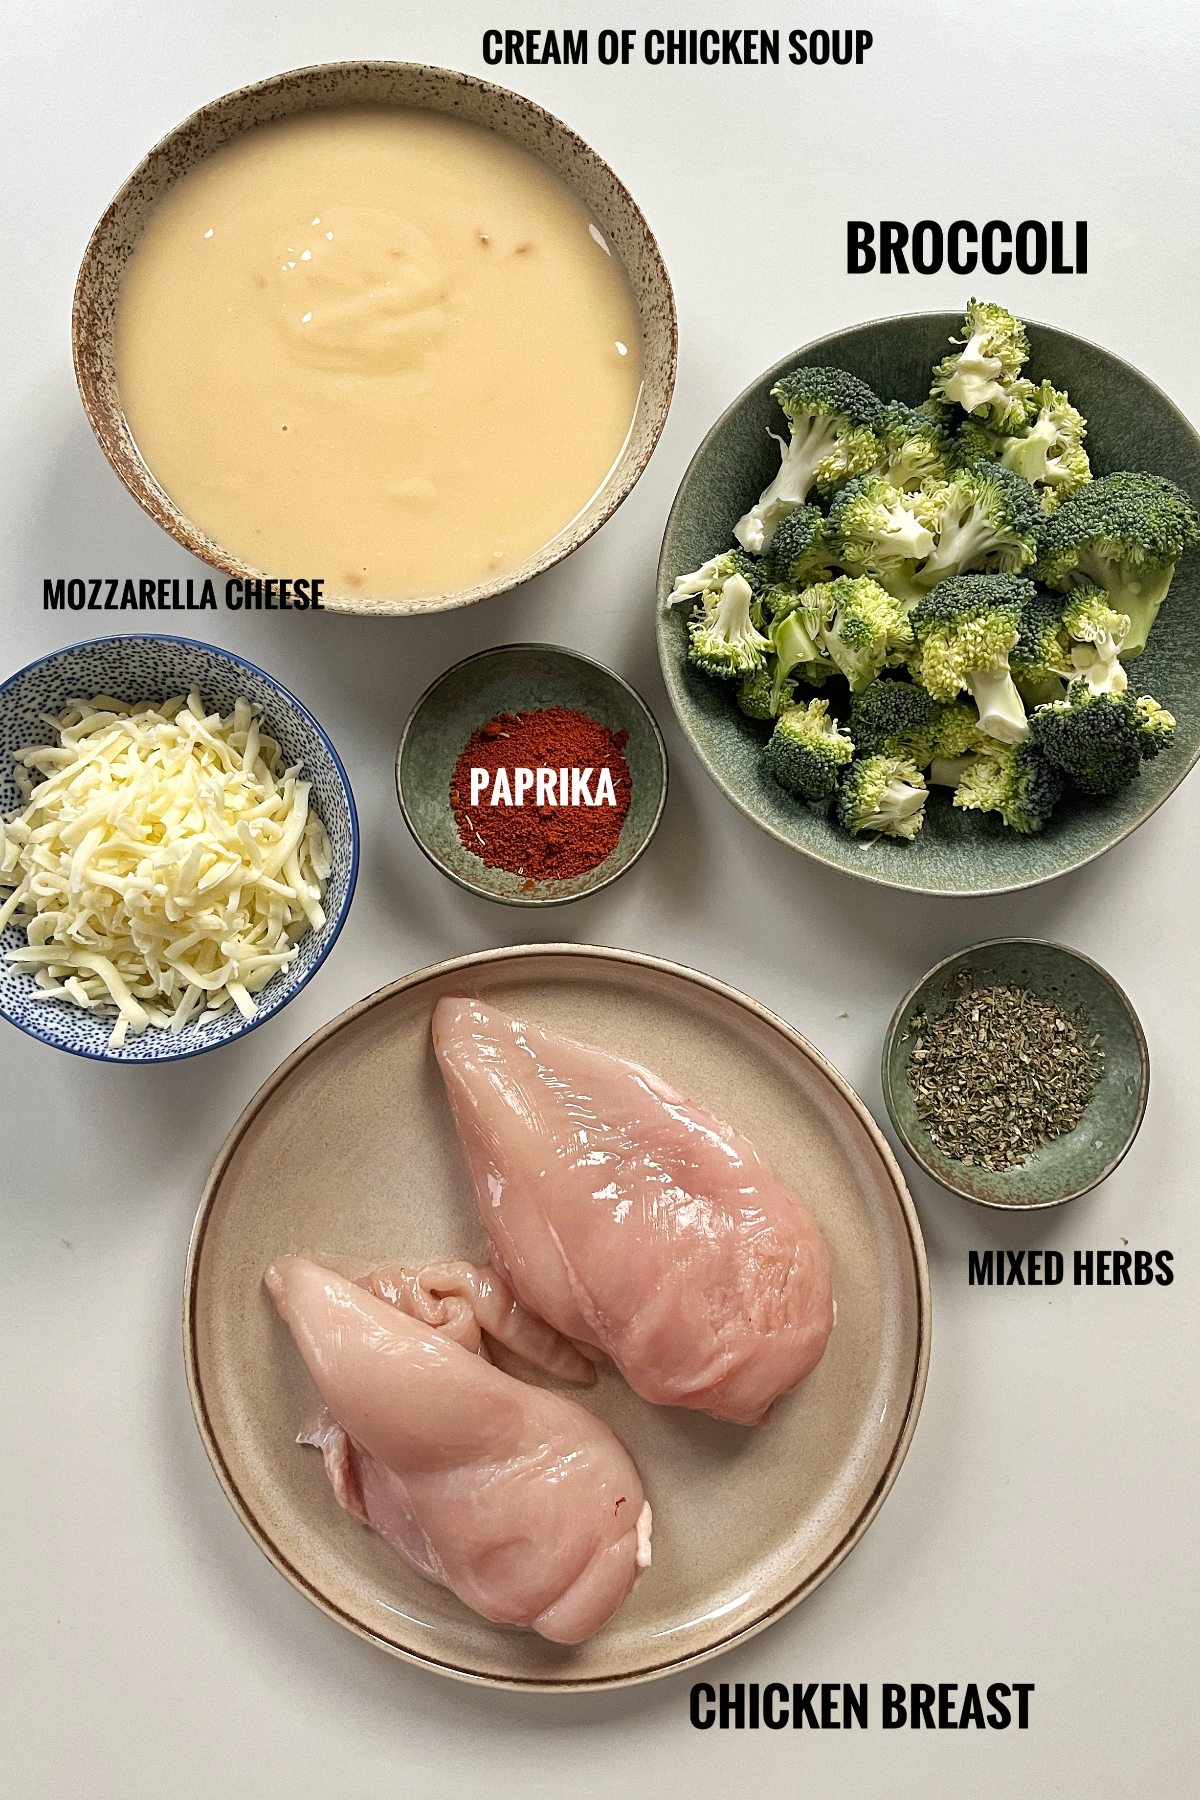 Image of all the ingredients needed for baked chicken with cream of chicken soup including cream of chicken soup, broccoli, mozzarella cheese, paprika, chicken breast, and mixed herbs.